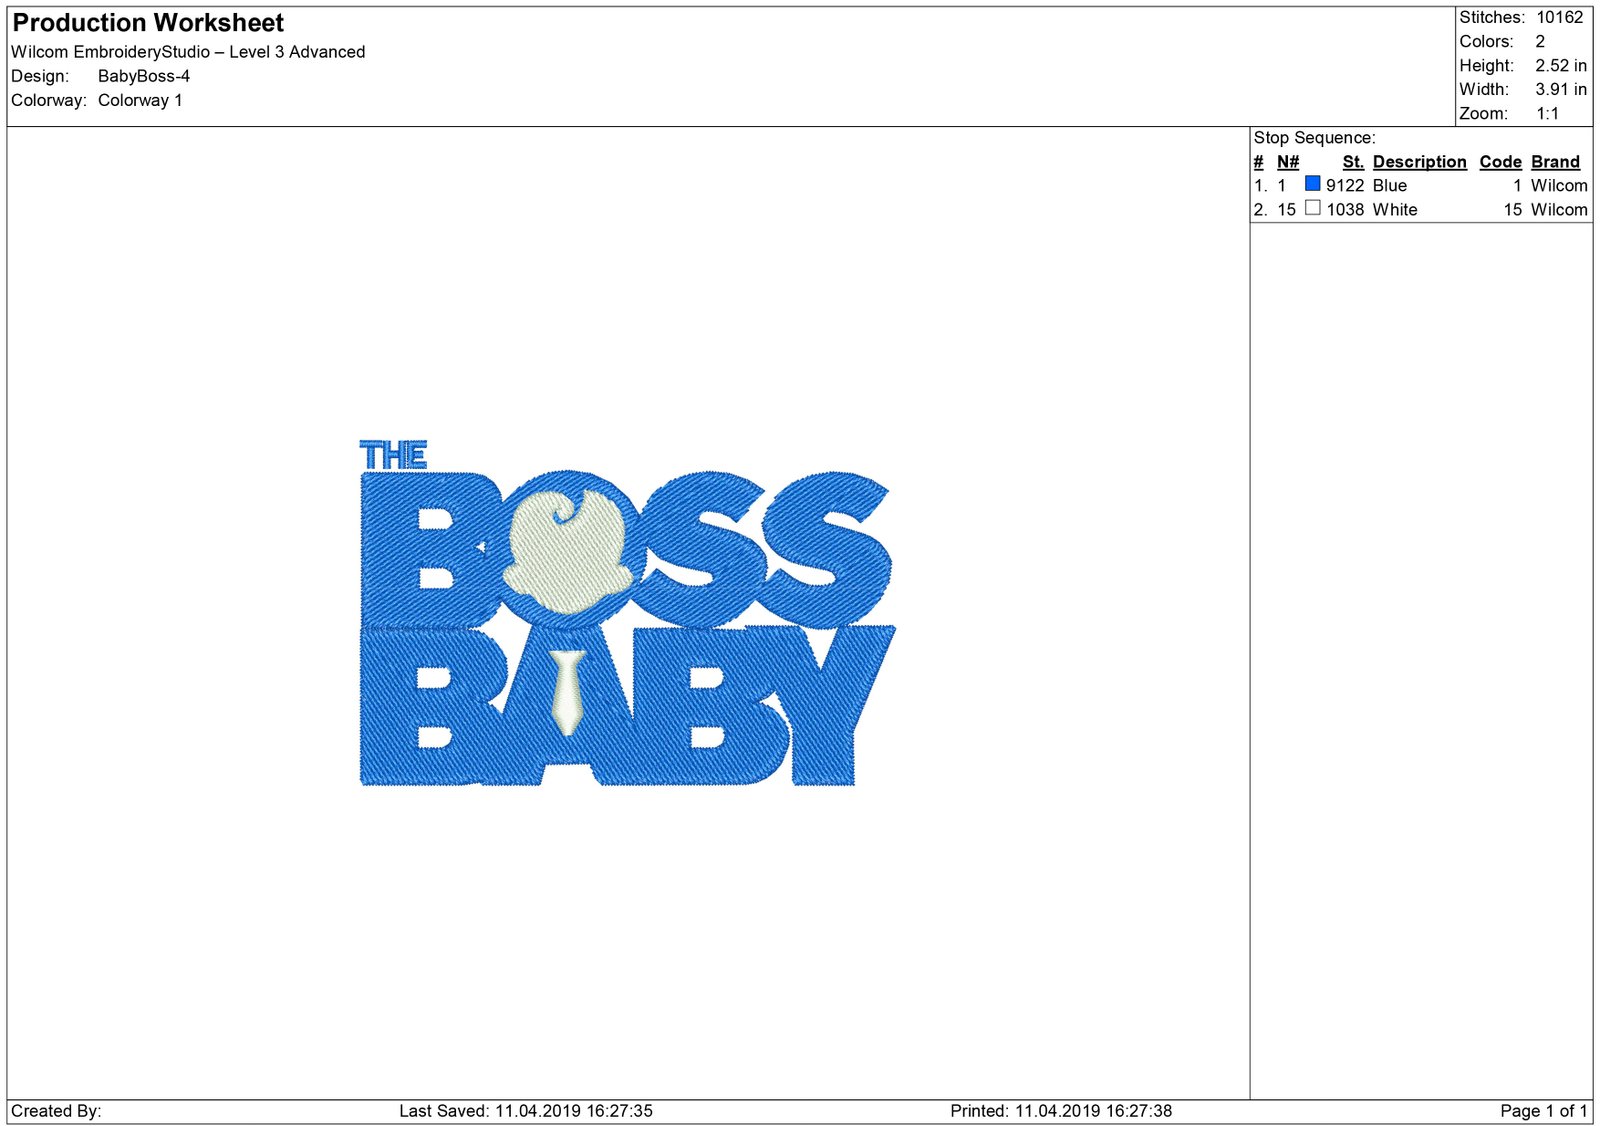 Download The Baby Boss | Machine Embroidery designs and SVG files